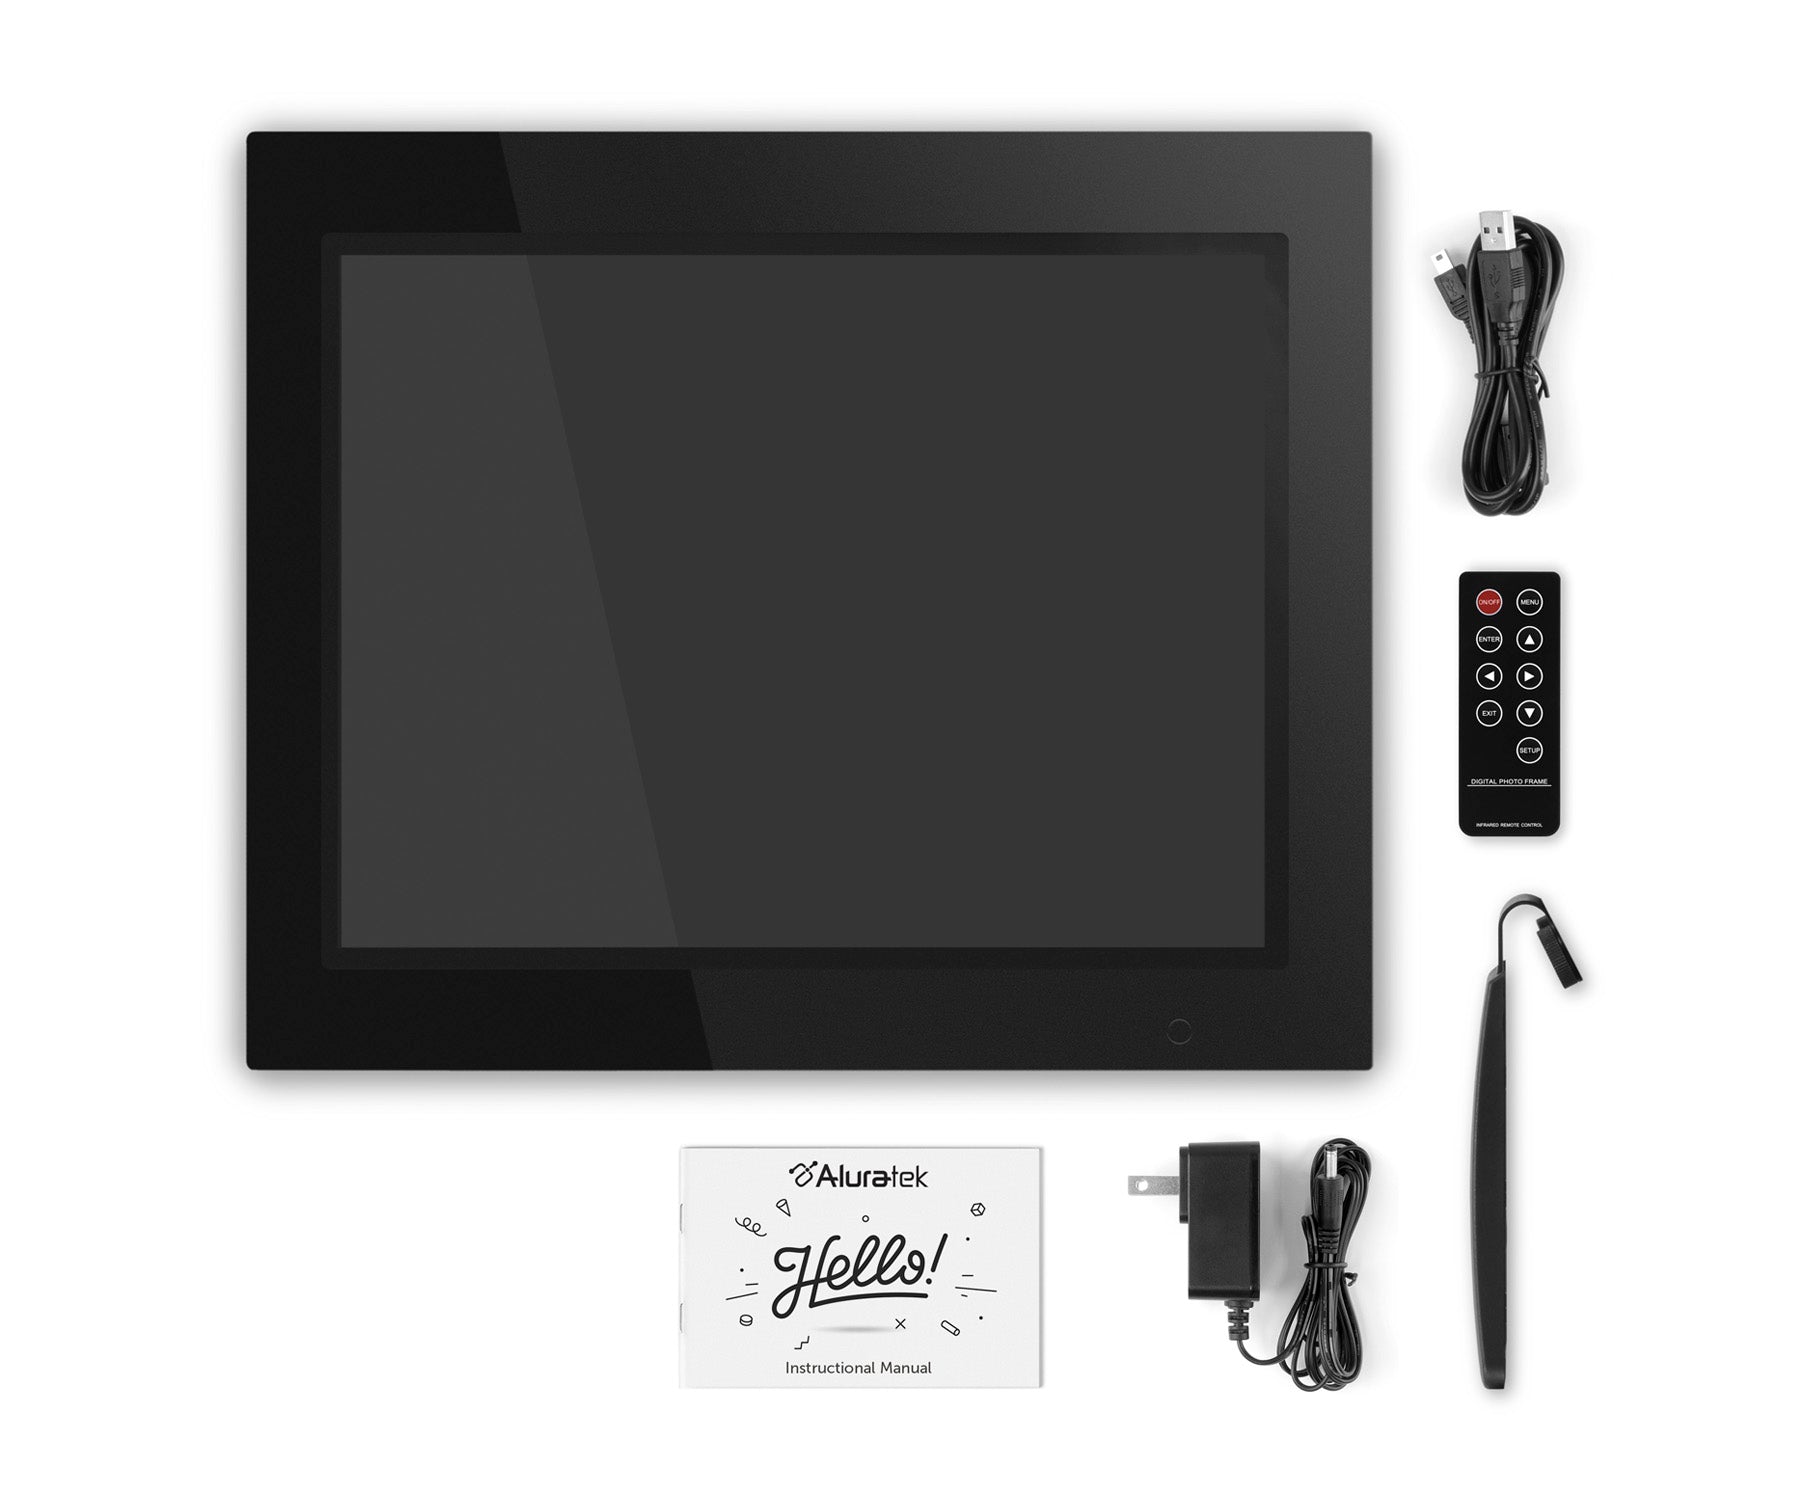 Digital Photo Frame with 4 GB Built-in Memory - 15 inch